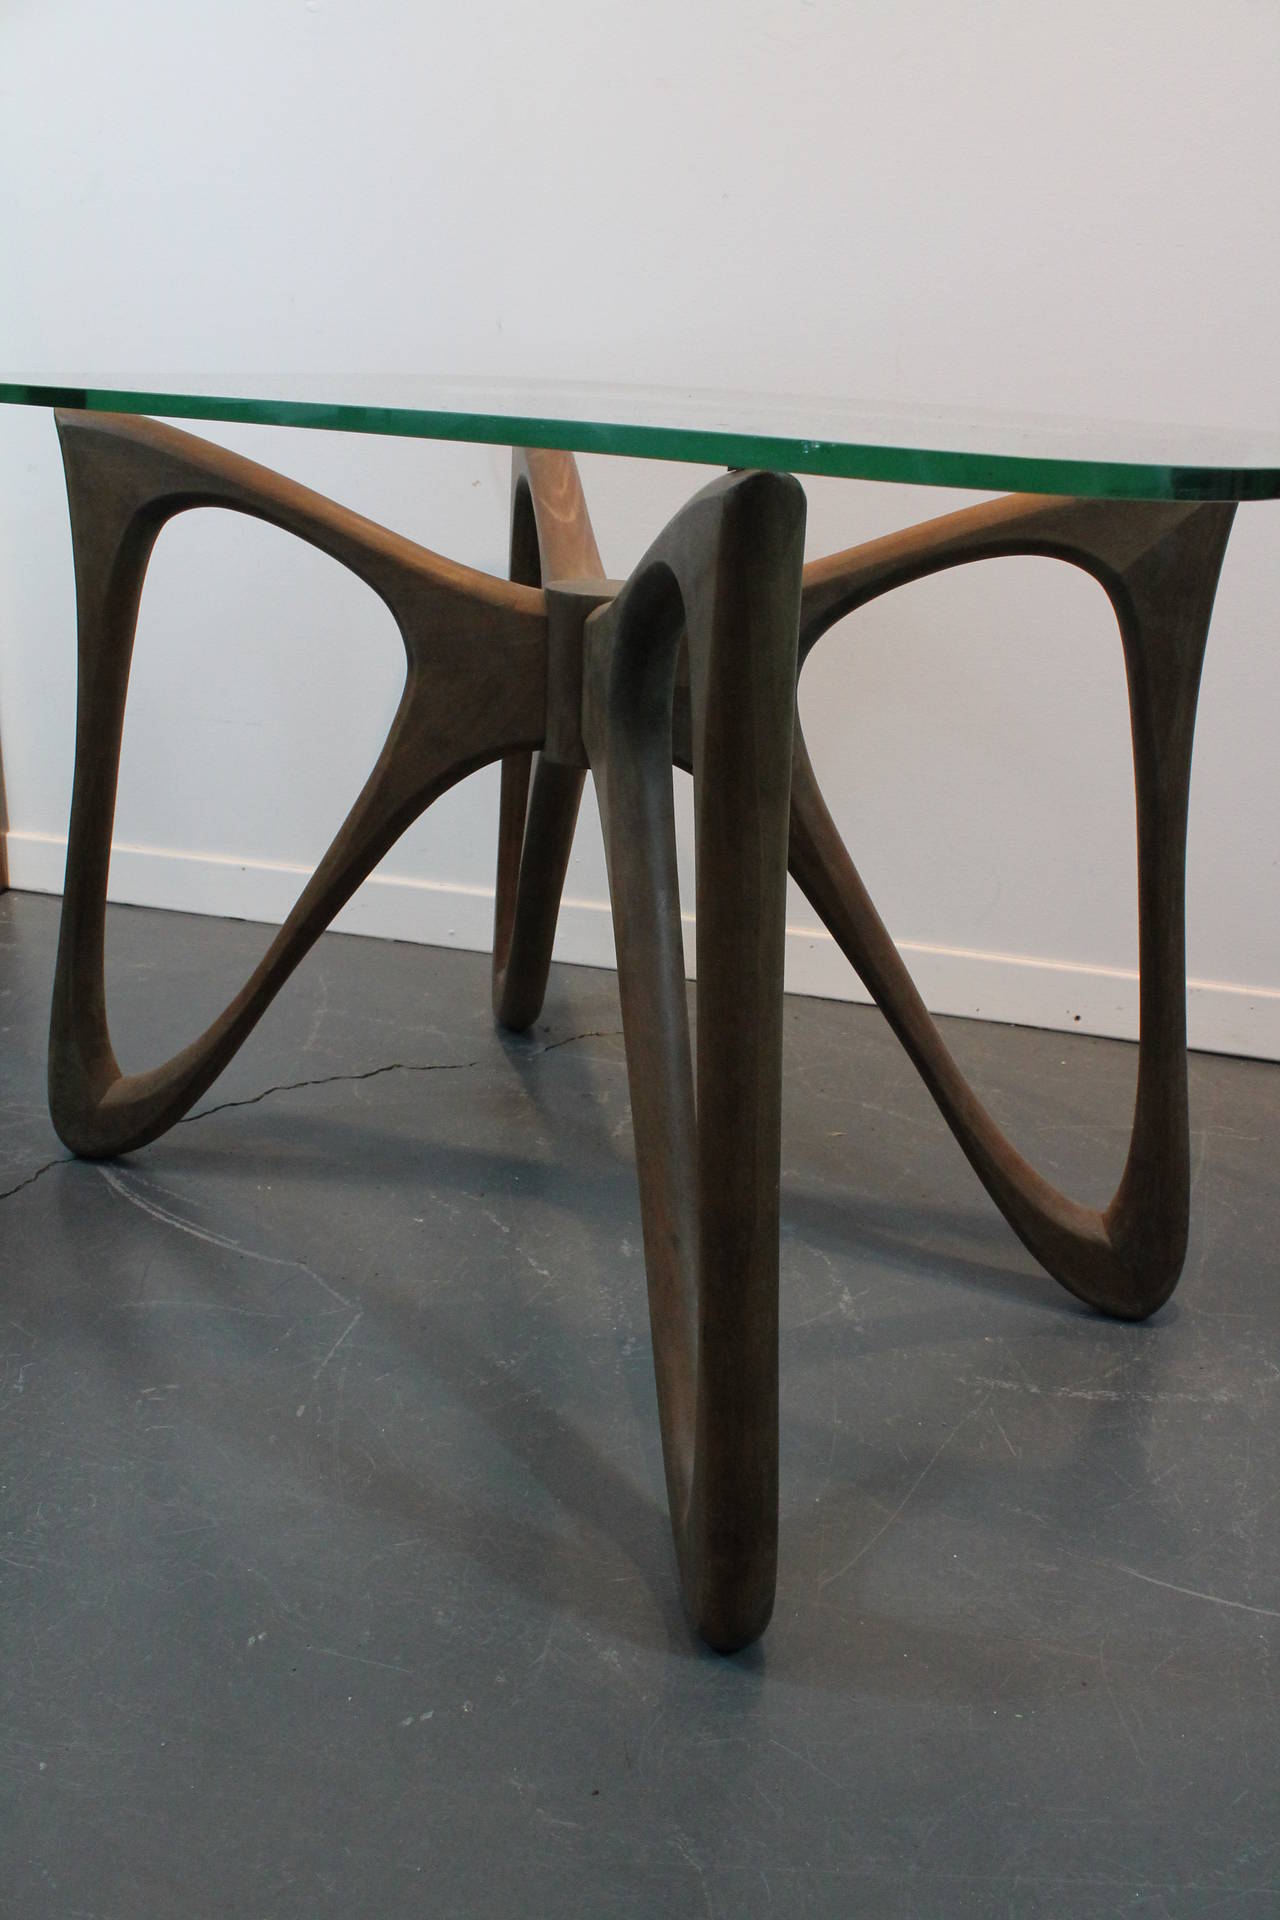 Biomorphic Mid-Century Modernist Sculptural Side Table In Good Condition For Sale In 3 Oaks, MI